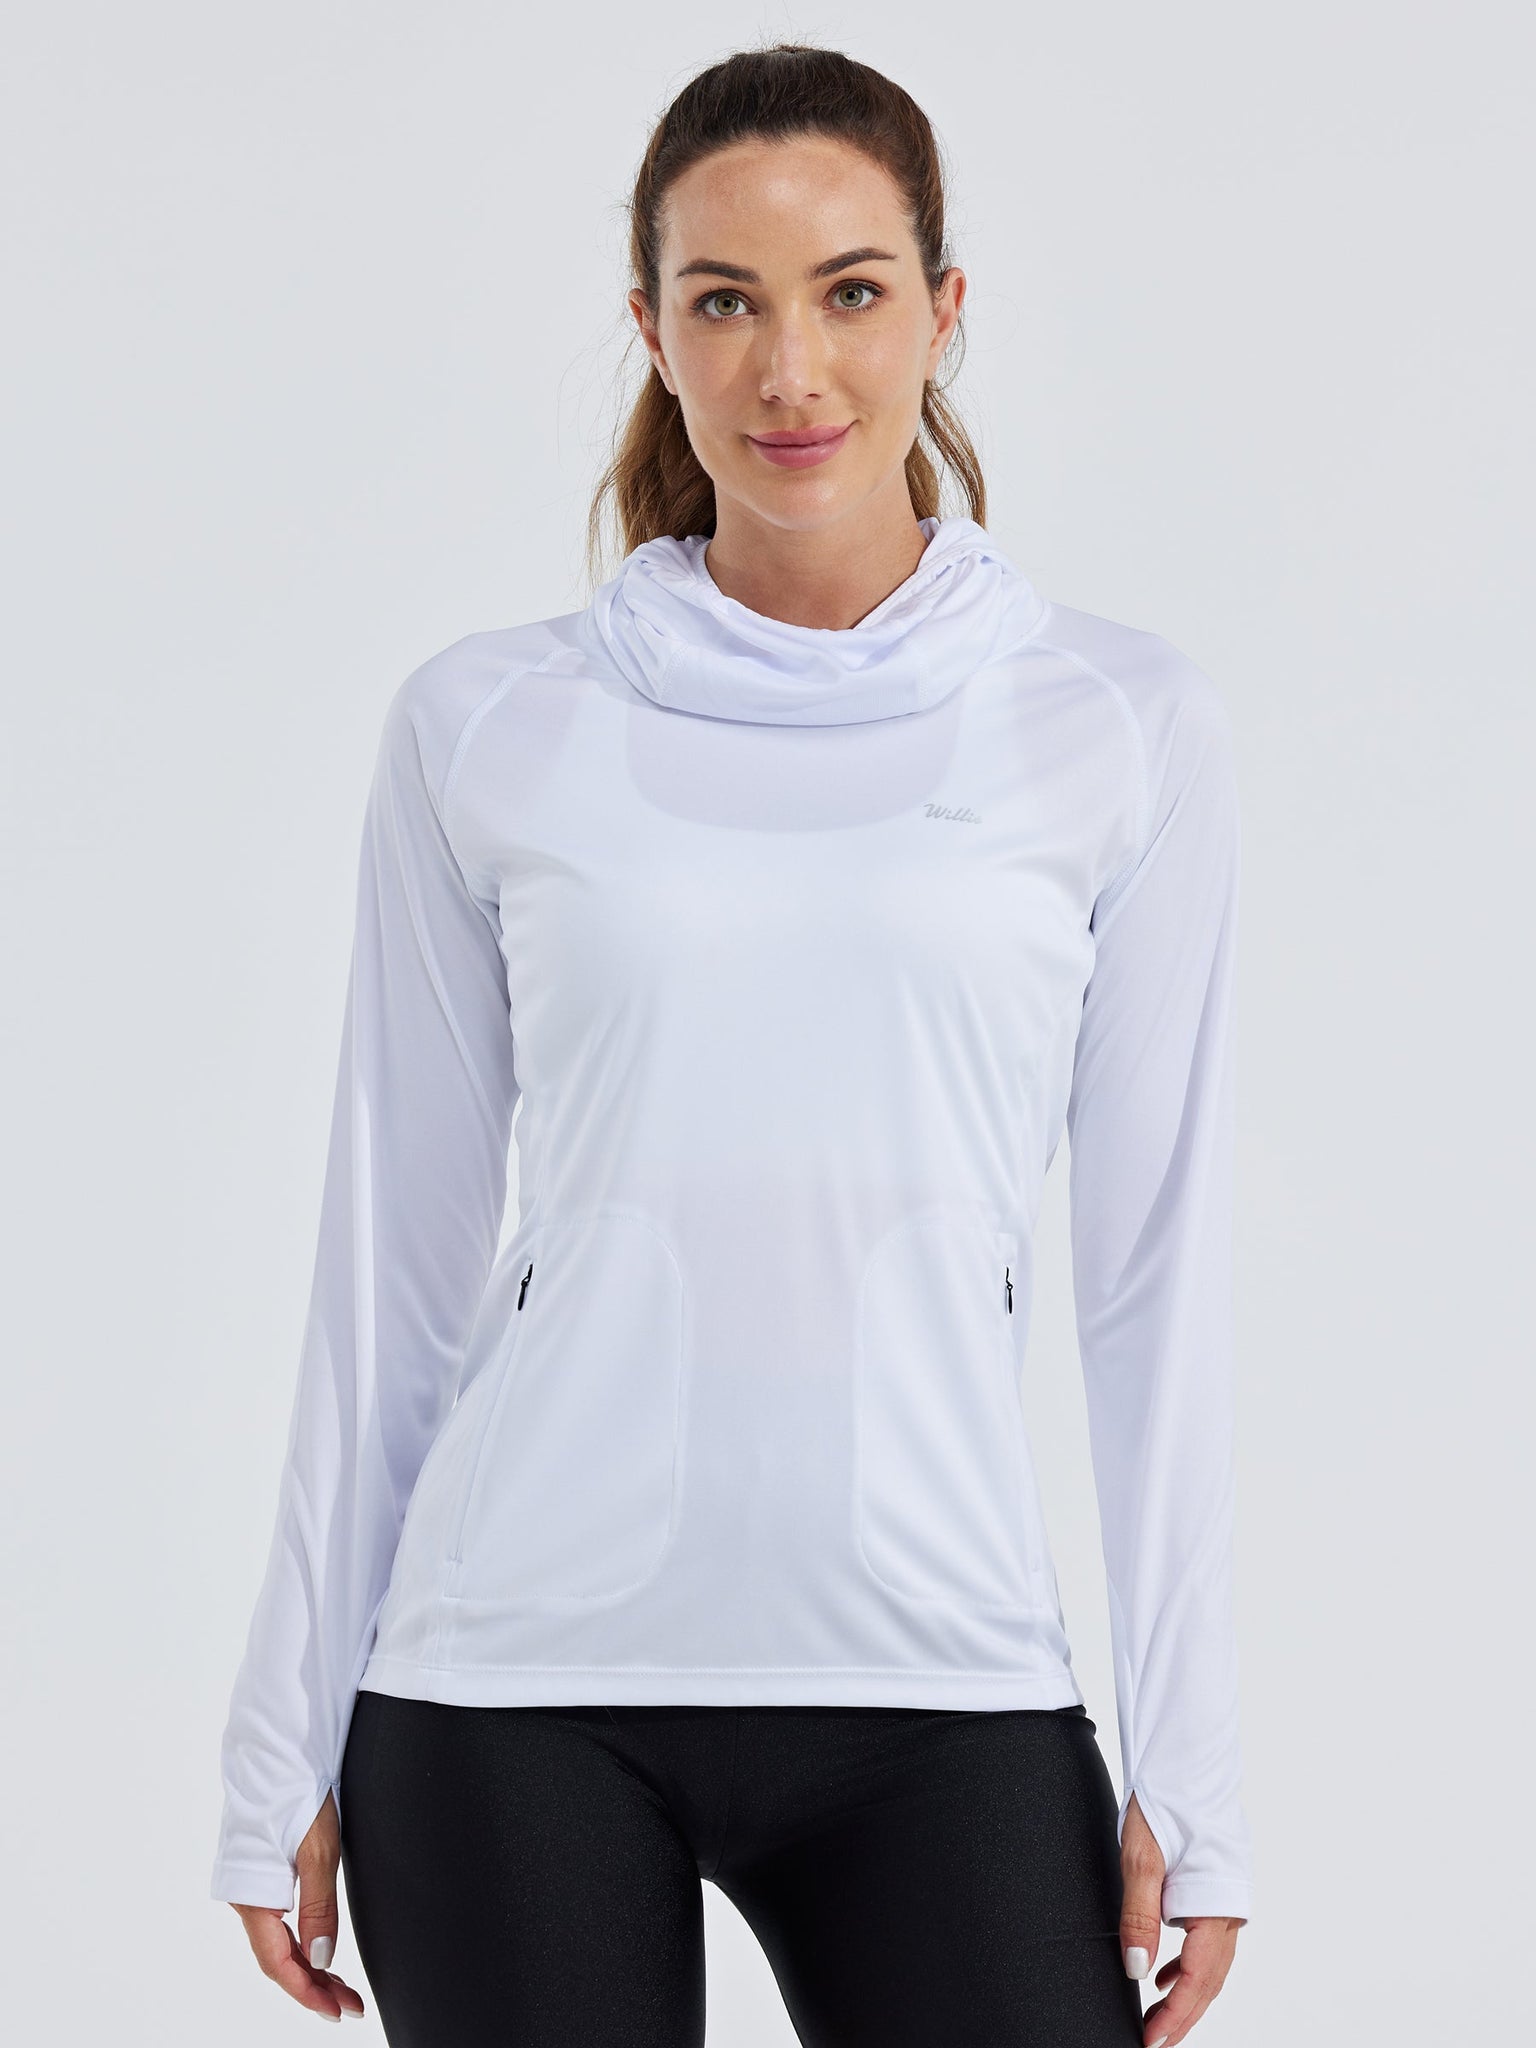 Women's Sun Protection Hoodie Long Sleeve with Face Mask Lightweight